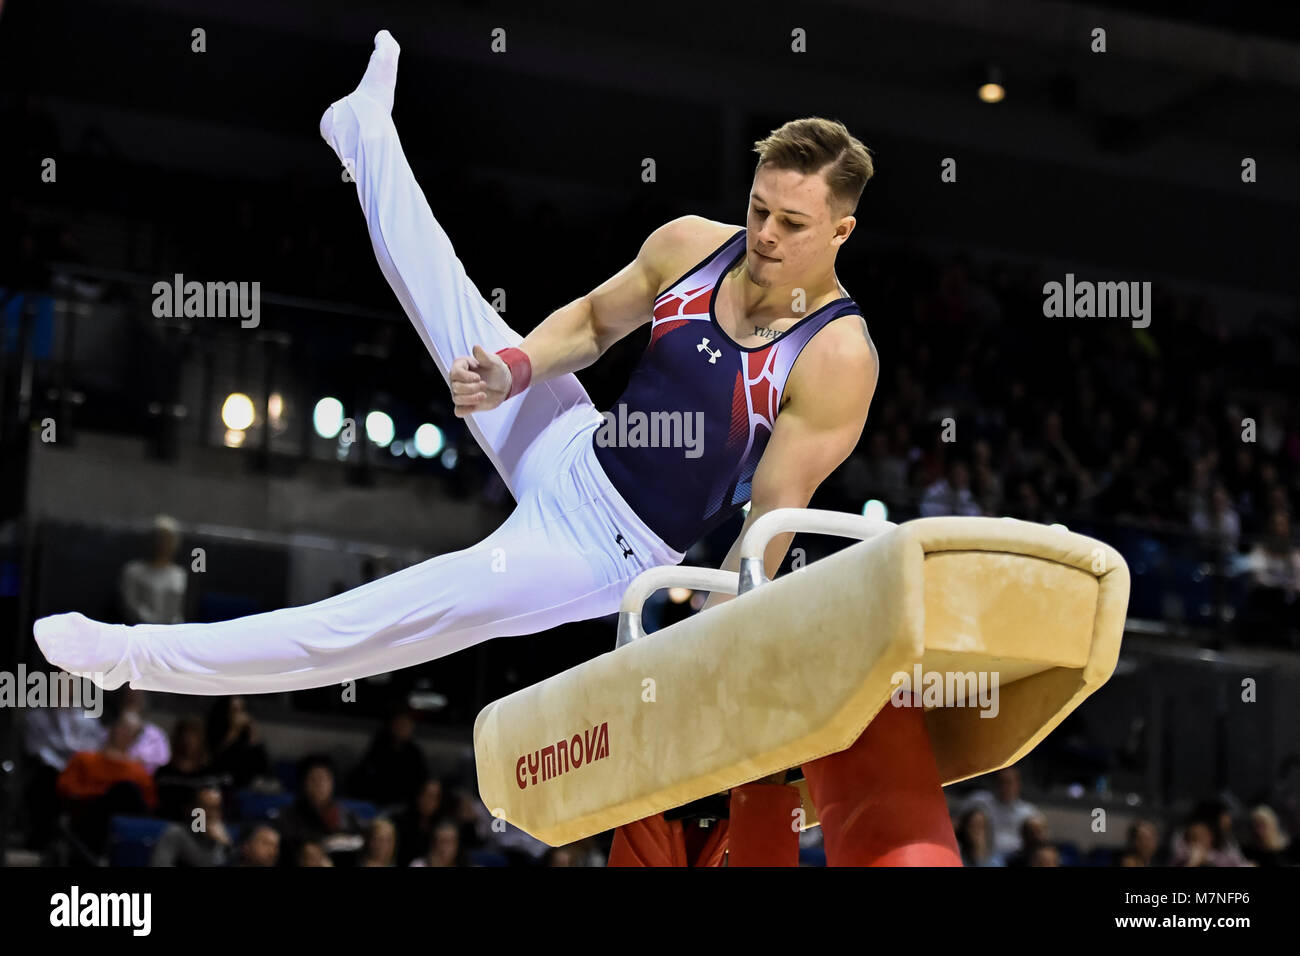 Echo Arena, Liverpool, UK. 11th Mar, 2018. Brinn Bevan competes on the Pommel Horse during the WAG Senior Apparatus Final/MAG Masters of the 2018 Gymnastics British Championships at Echo Arena on Sunday, 11 March 2018. LIVERPOOL ENGLAND. Credit: Taka G Wu Credit: Taka Wu/Alamy Live News Stock Photo